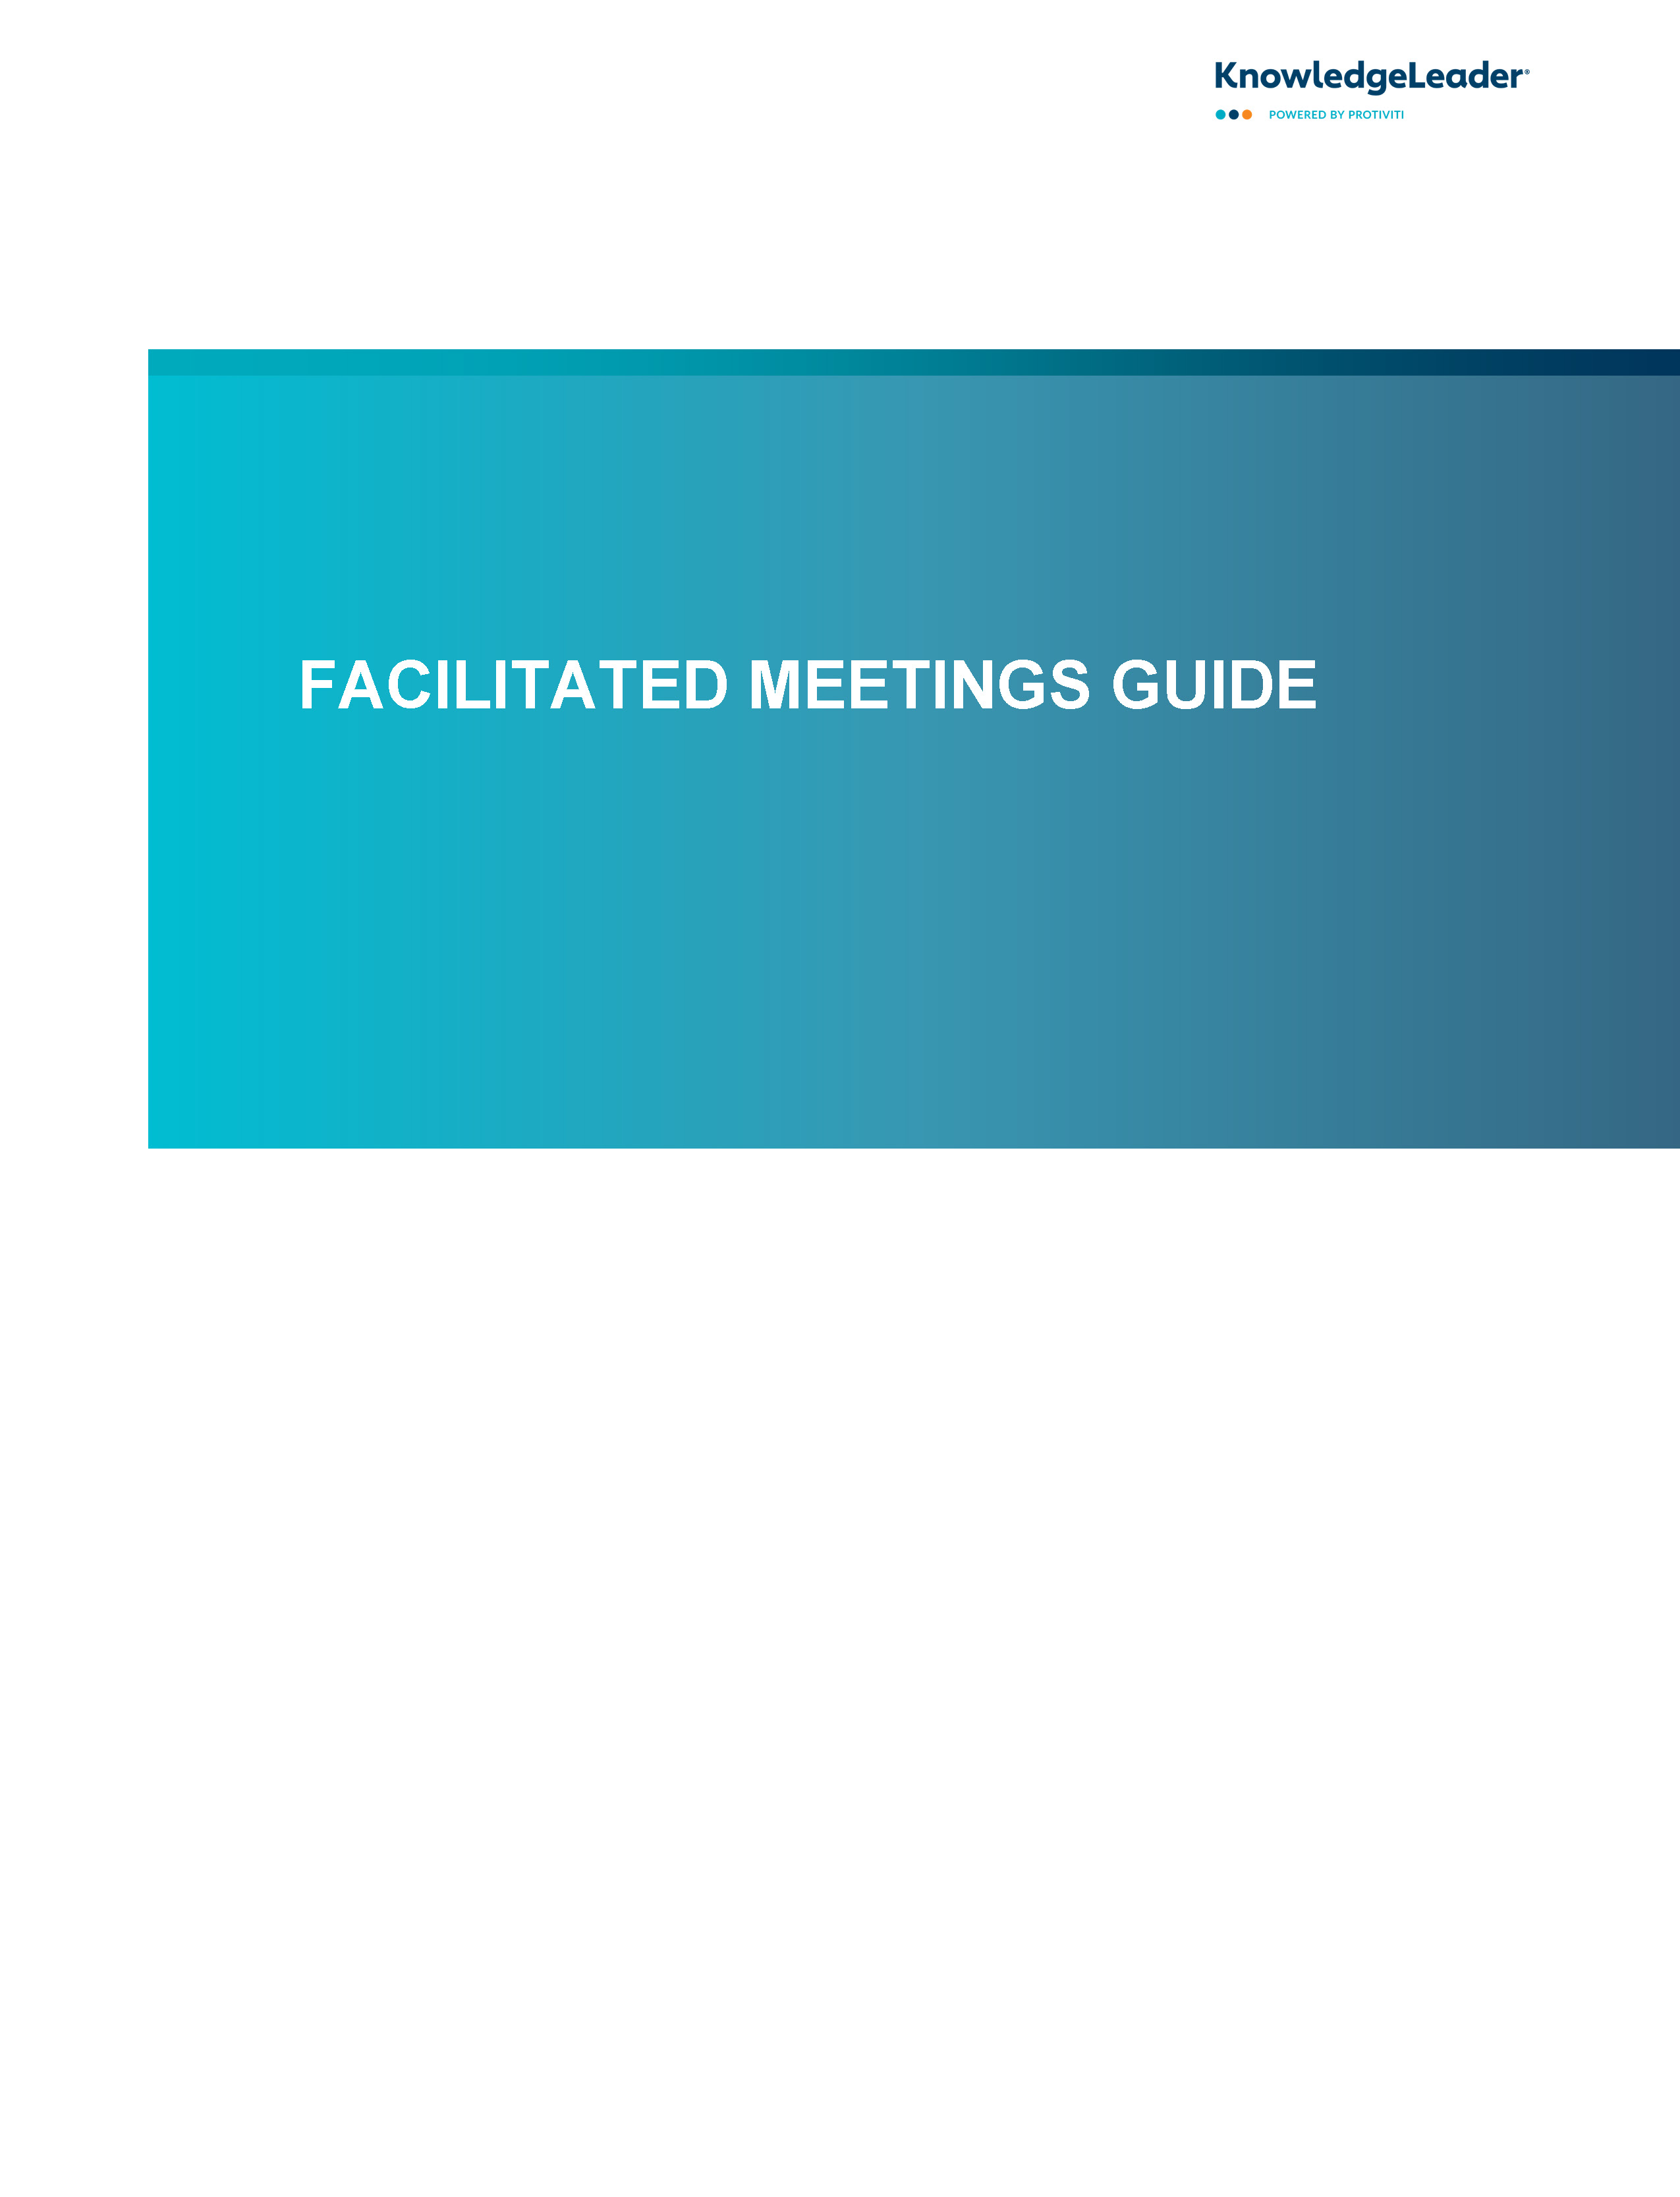 Screenshot of the first page of Facilitated Meetings Guide